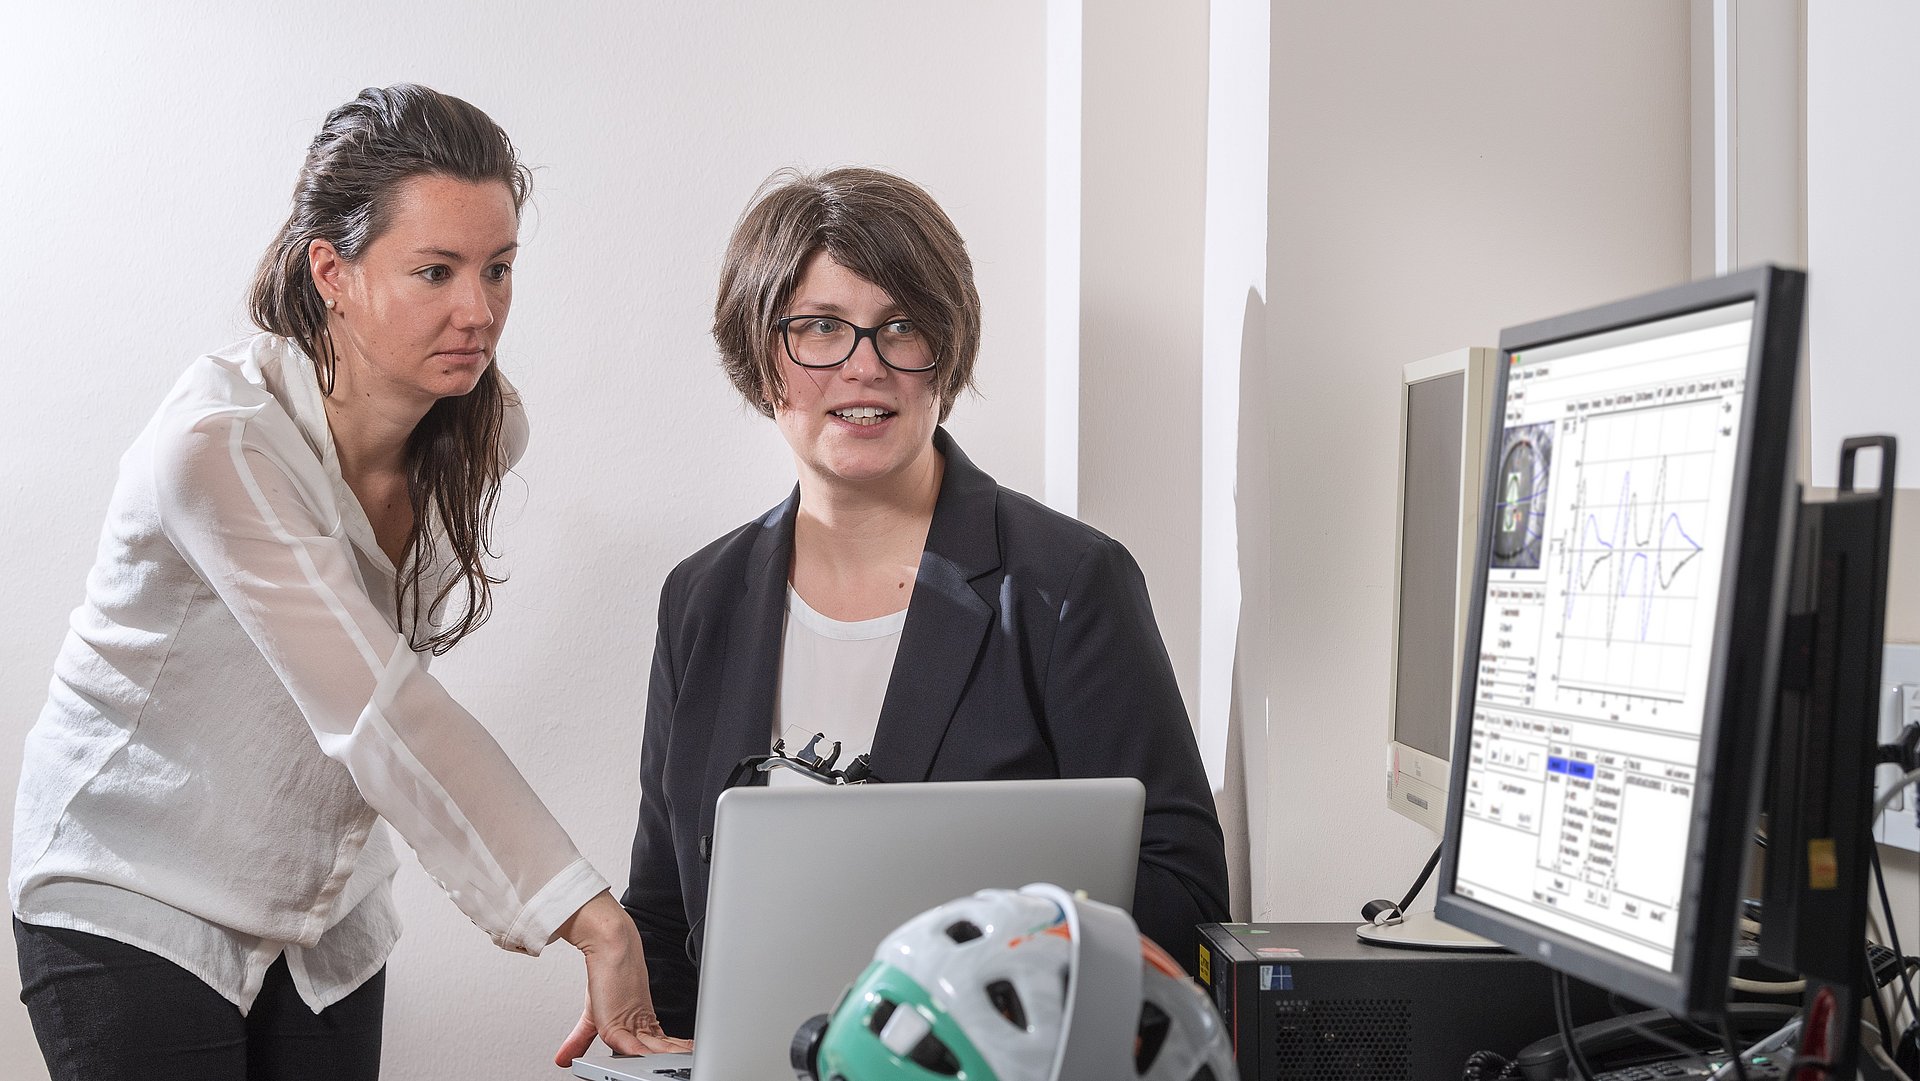 Dr. Cecilia Ramaioli (left) and Prof. Nadine Lehnen discuss results of some measurements in the study about functional dizziness and its causes. 